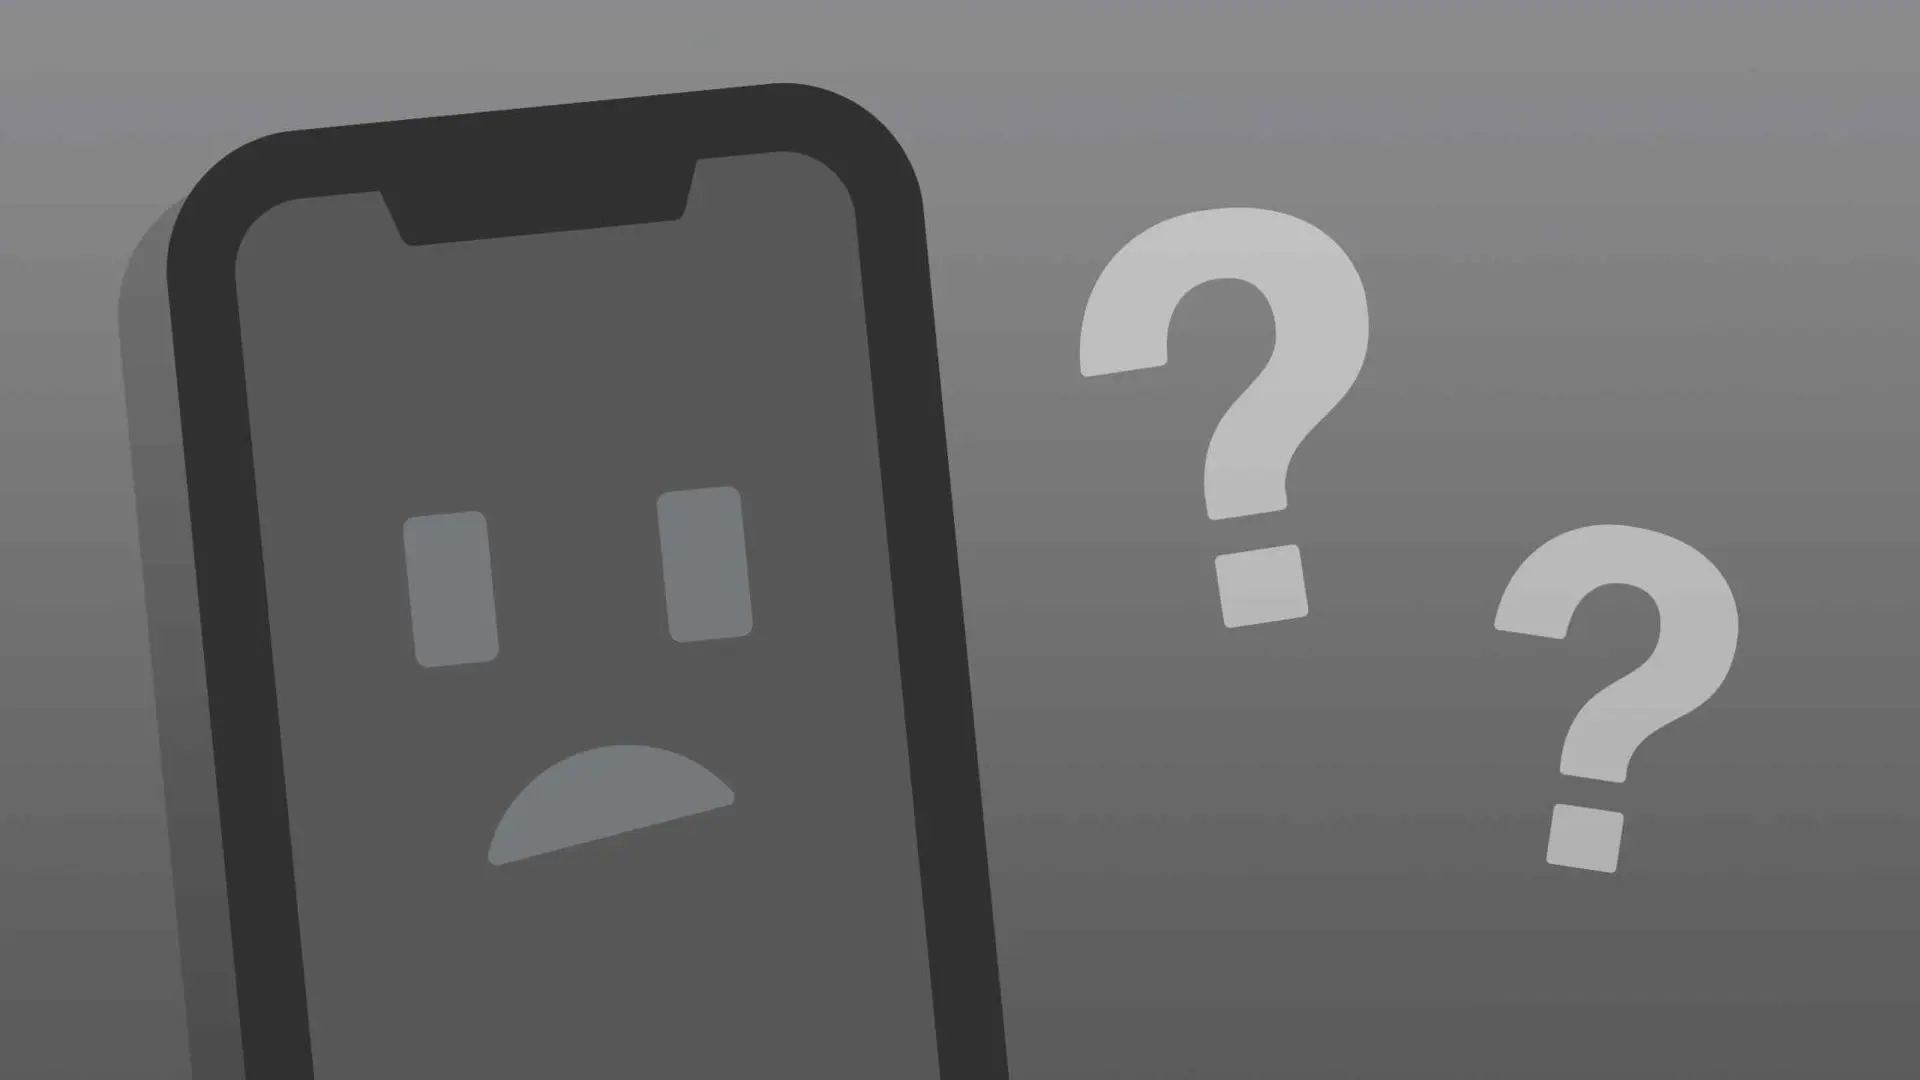 How to Fix the iPhone Black Screen Problems